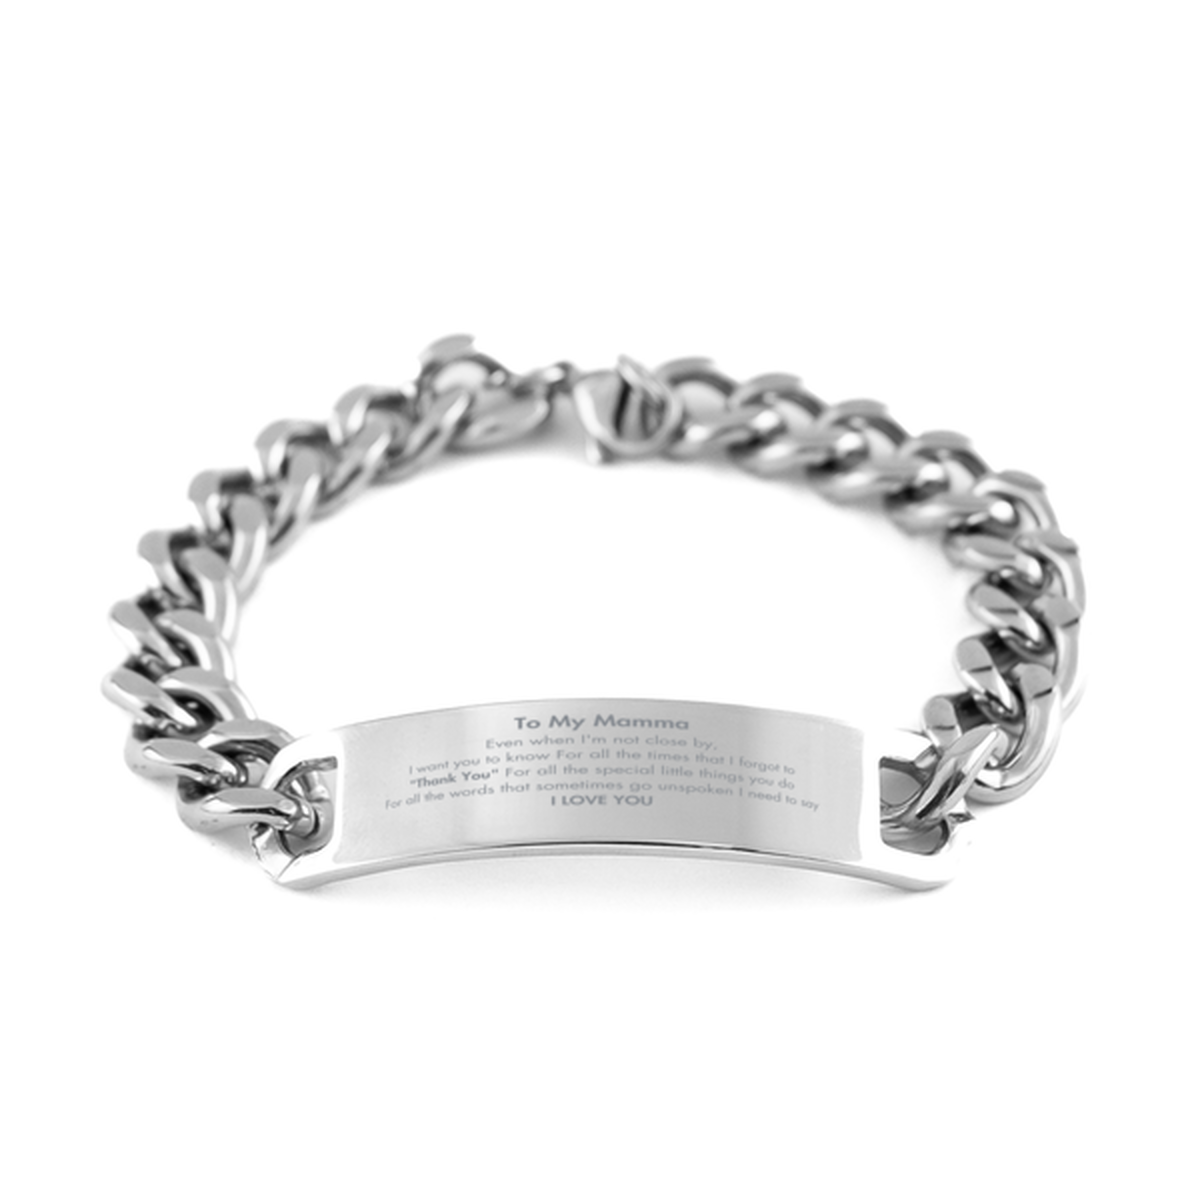 Thank You Gifts for Mamma, Keepsake Cuban Chain Stainless Steel Bracelet Gifts for Mamma Birthday Mother's day Father's Day Mamma For all the words That sometimes go unspoken I need to say I LOVE YOU